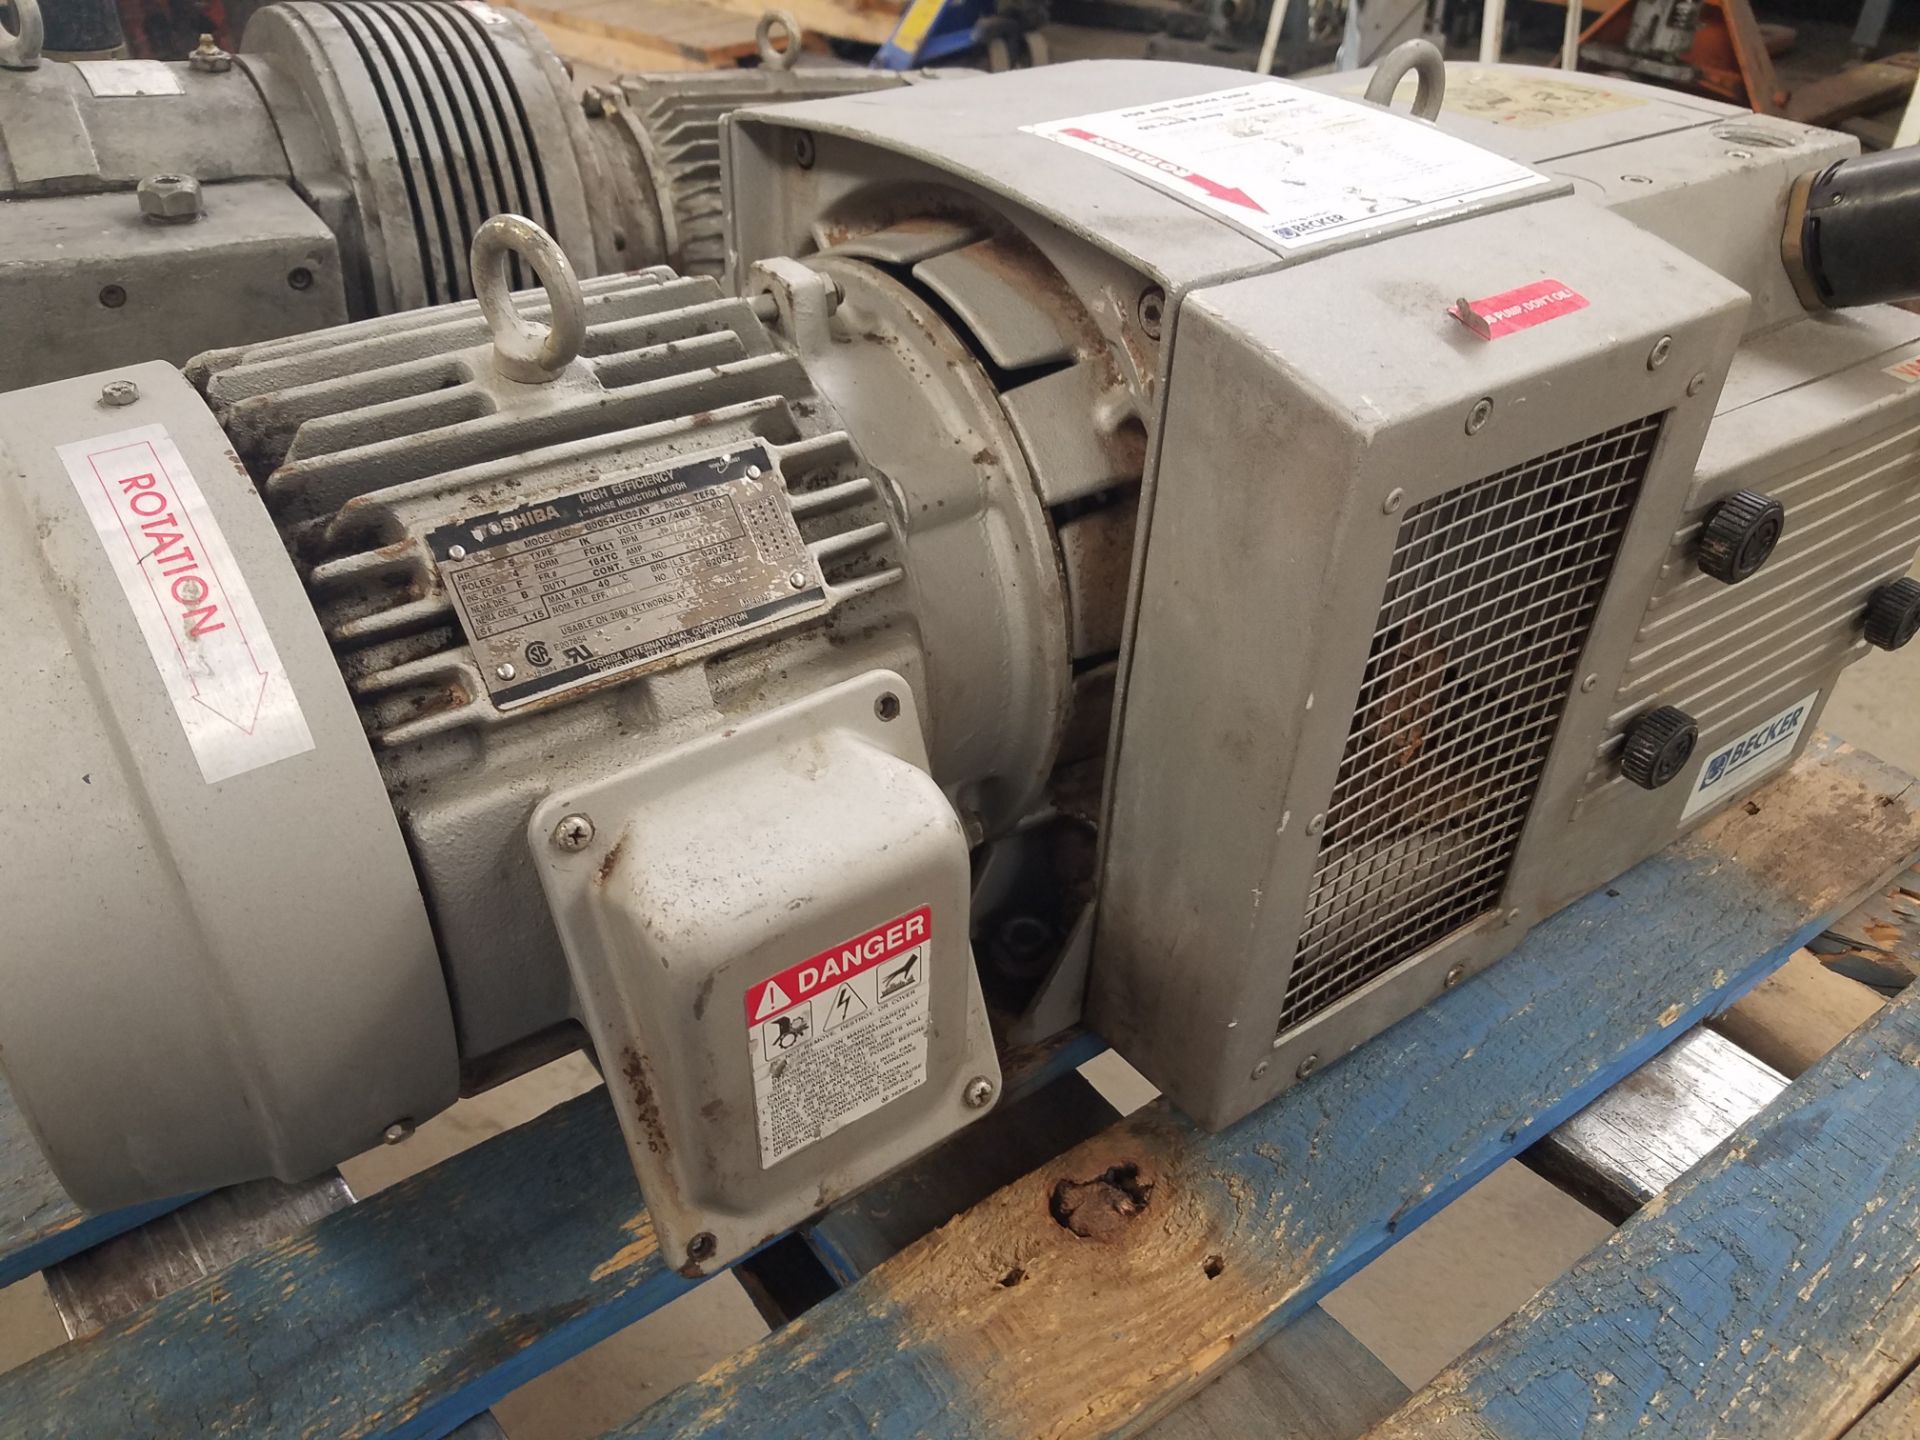 Becker KVT 3.80 Vacuum Pump, 5 hp, Volt 230/360, 3-Phase (Loading Fee $100) (Located Fort Worth, TX - Image 4 of 5